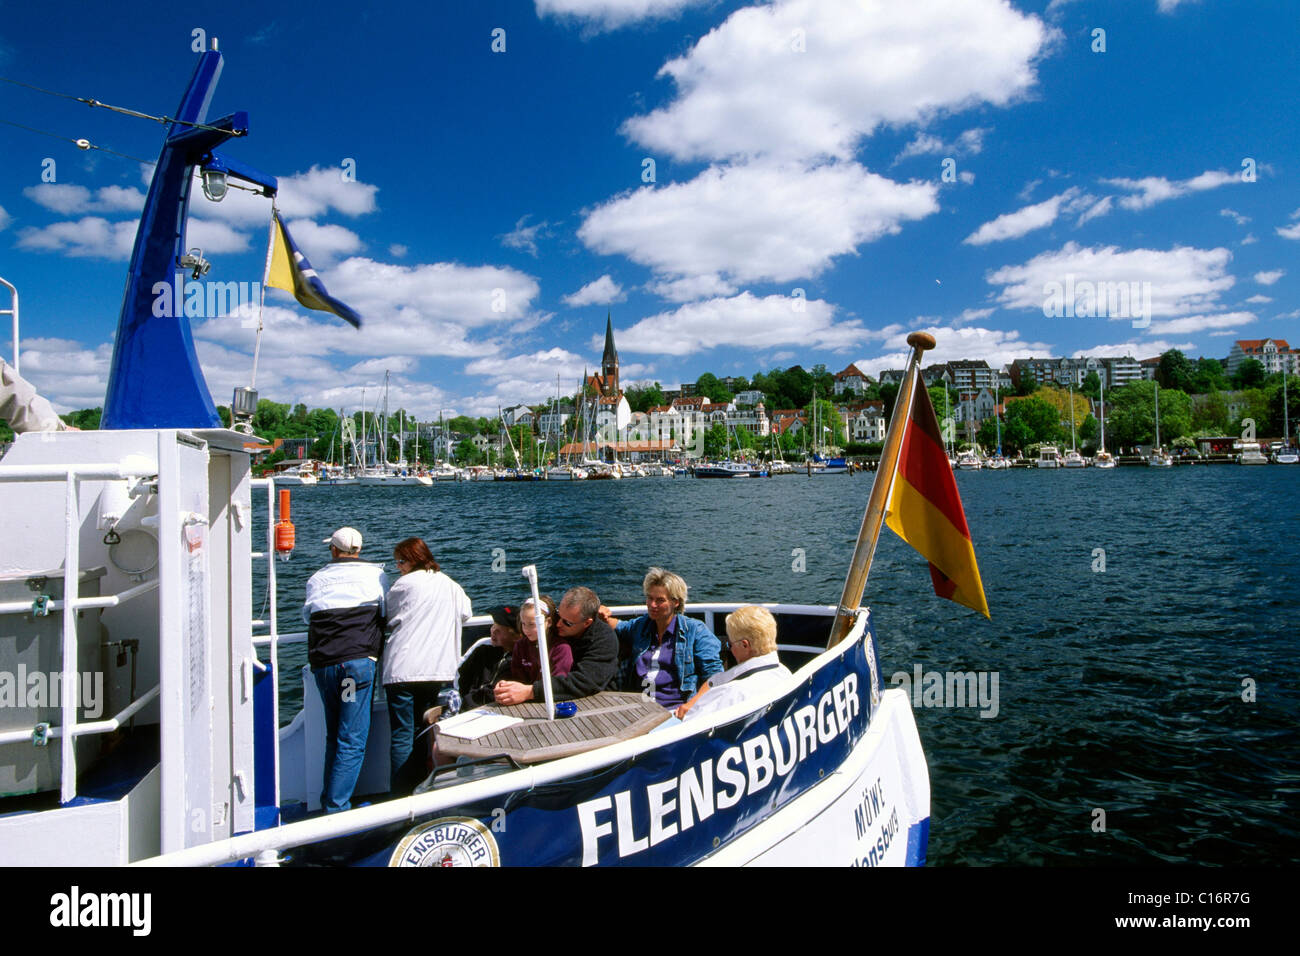 Boat at the harbour in Flensburg, Schleswig-Holstein, Germany, Europe Stock Photo